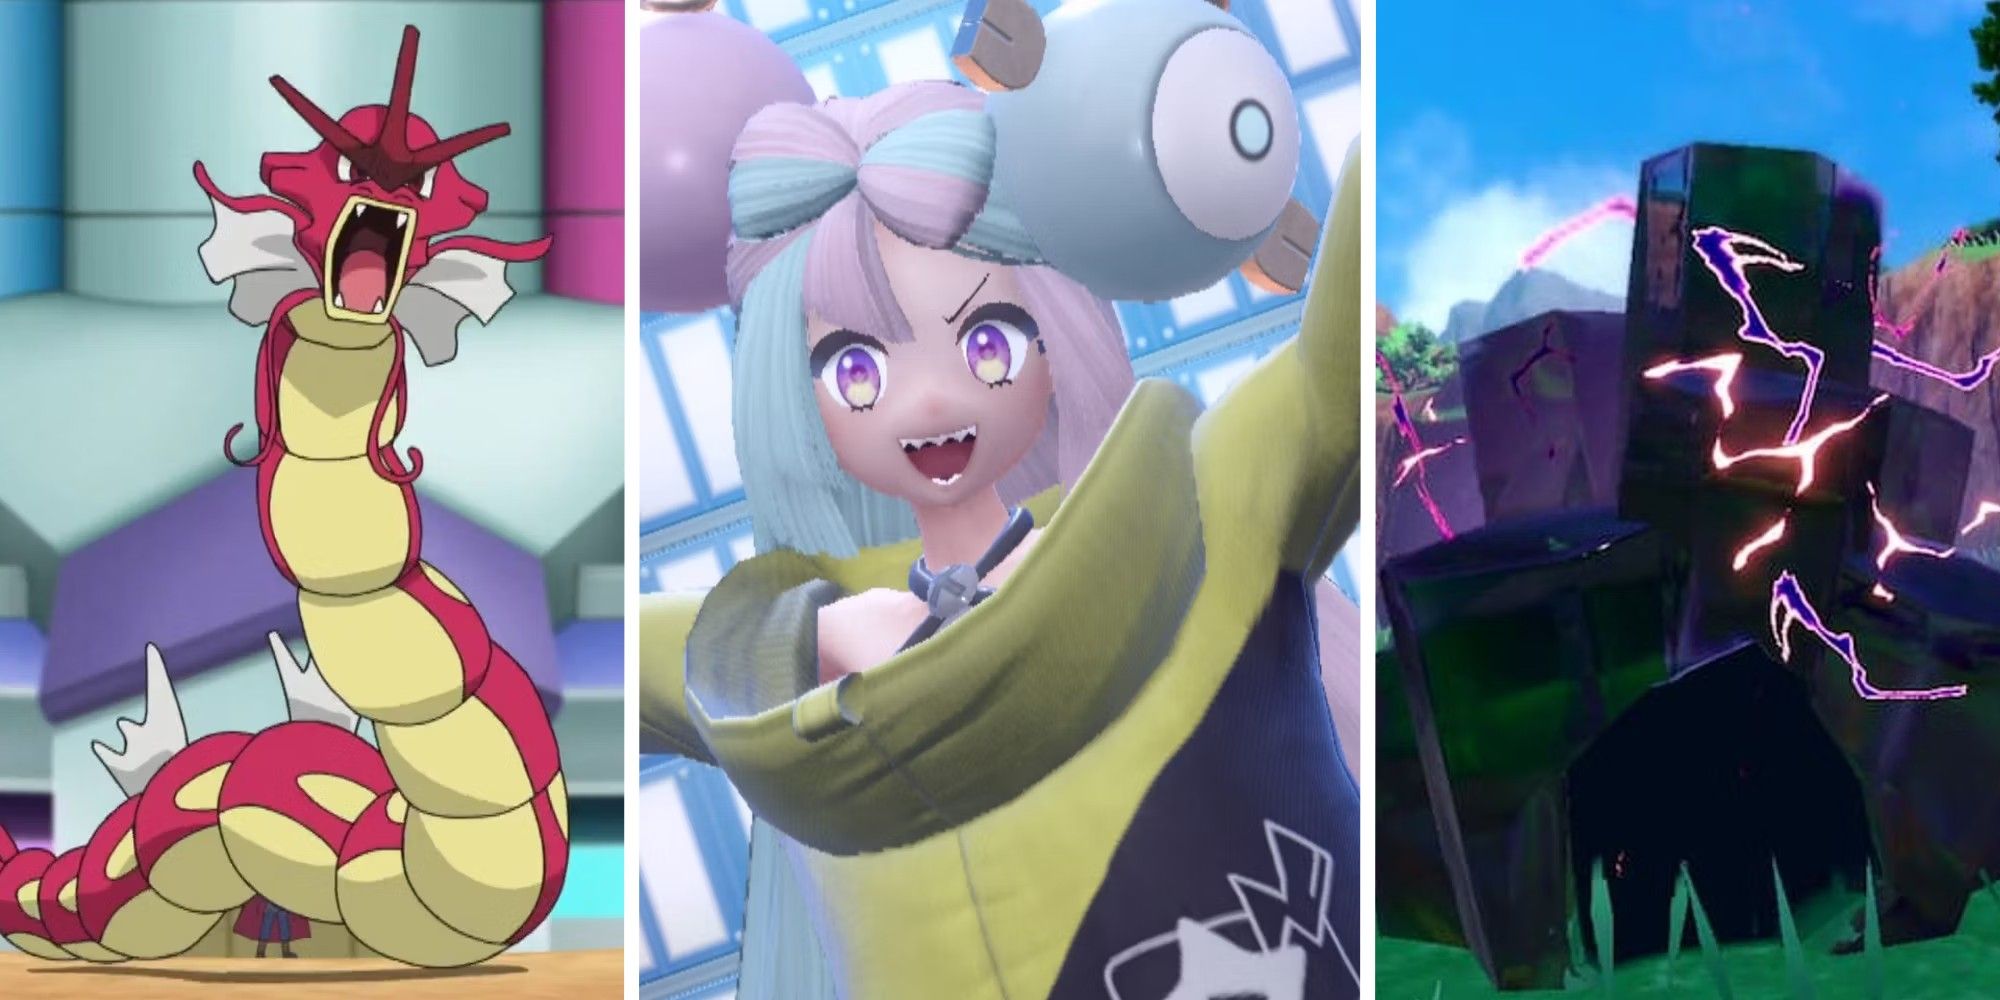 Pokemon Scarlet and Violet: Everything You Need to Know Before